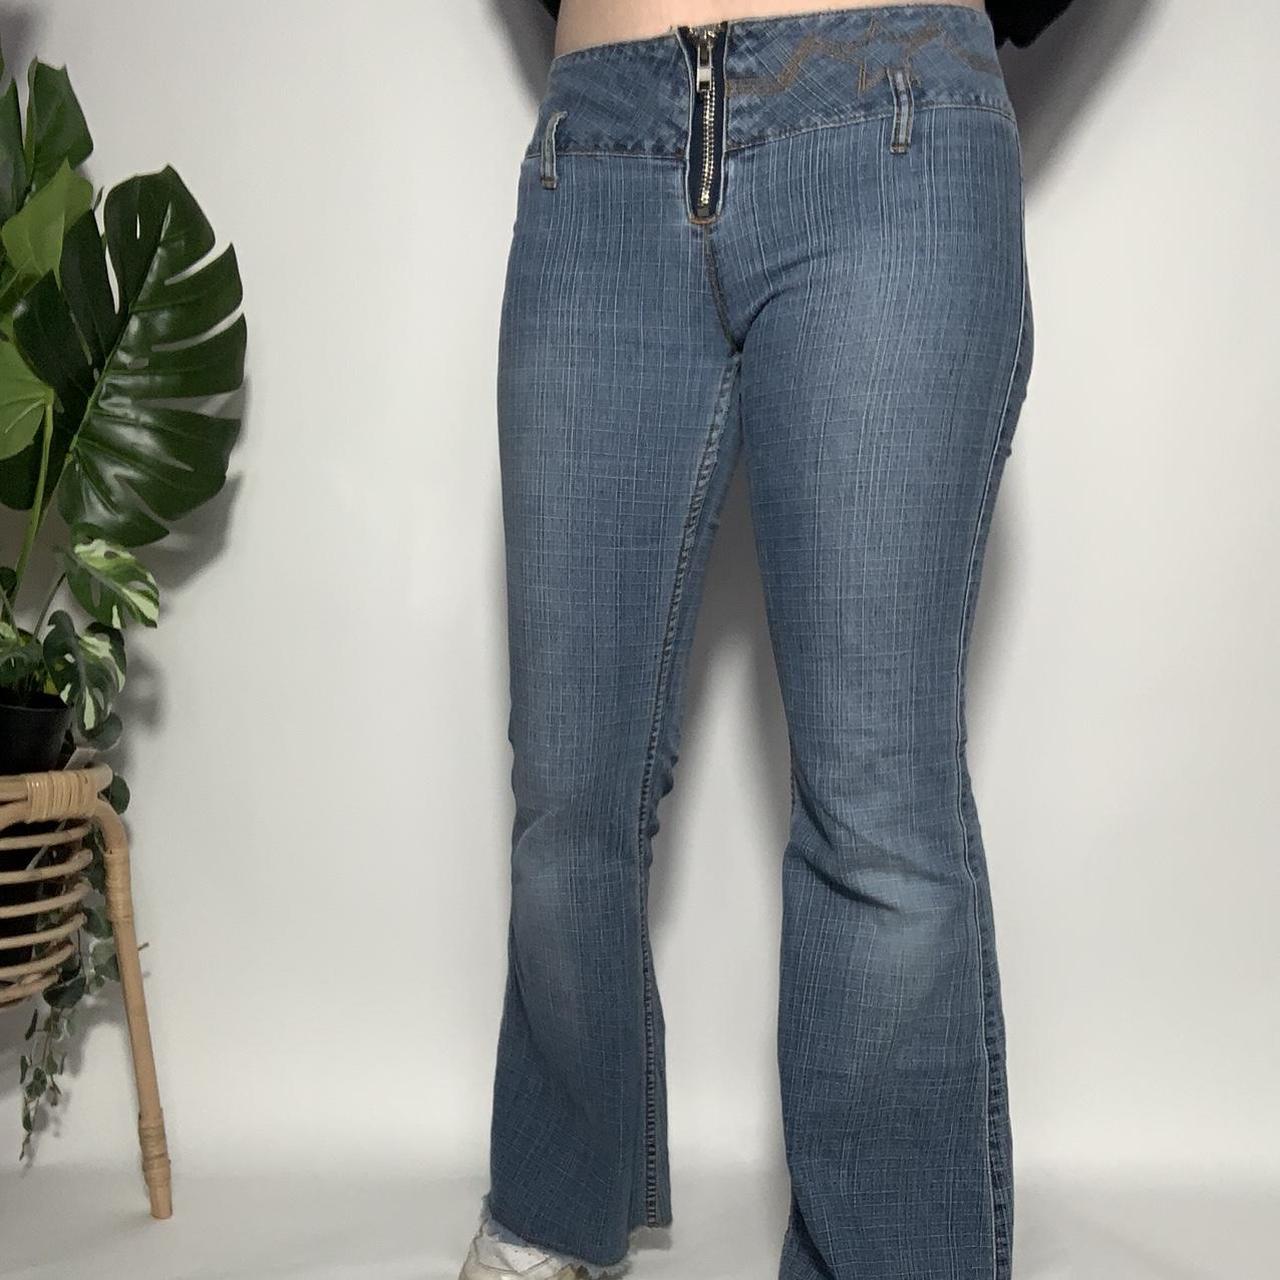 Vintage y2k low-waisted flared bootcut cutoff jeans with star embroidery